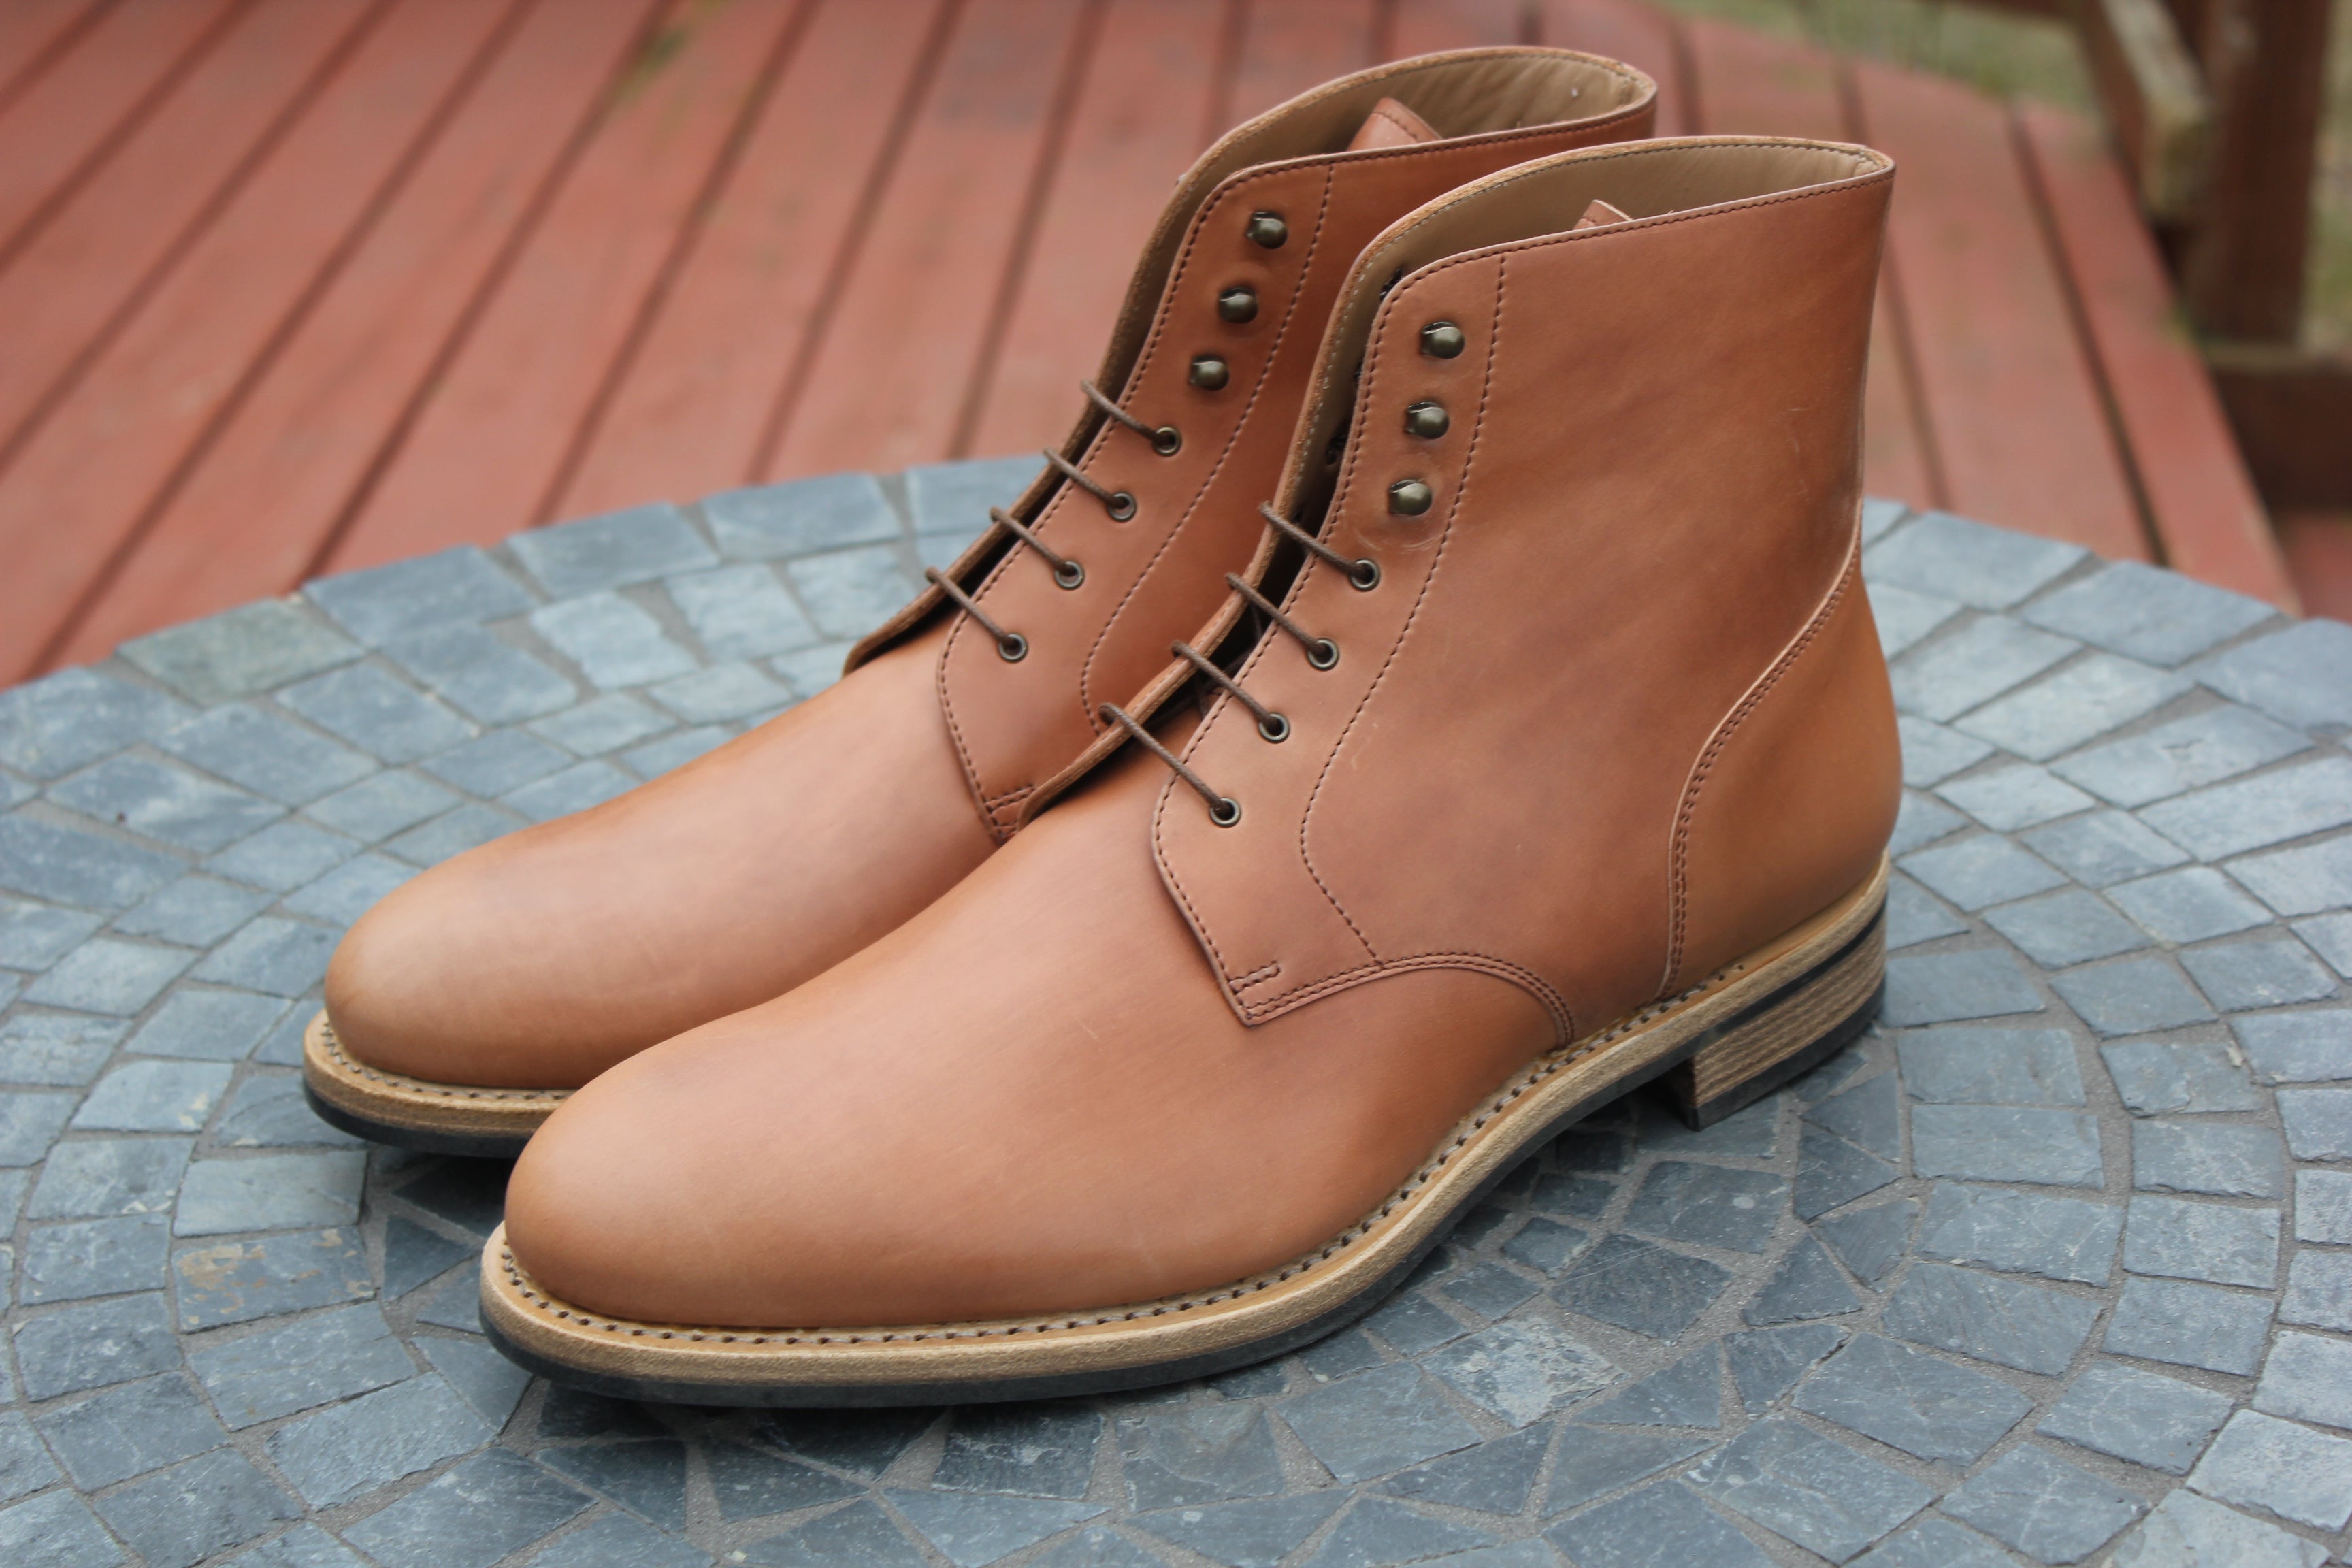 Rider Boot Company - Horween Unglazed Natural Shell Cordovan Dundalk Boots